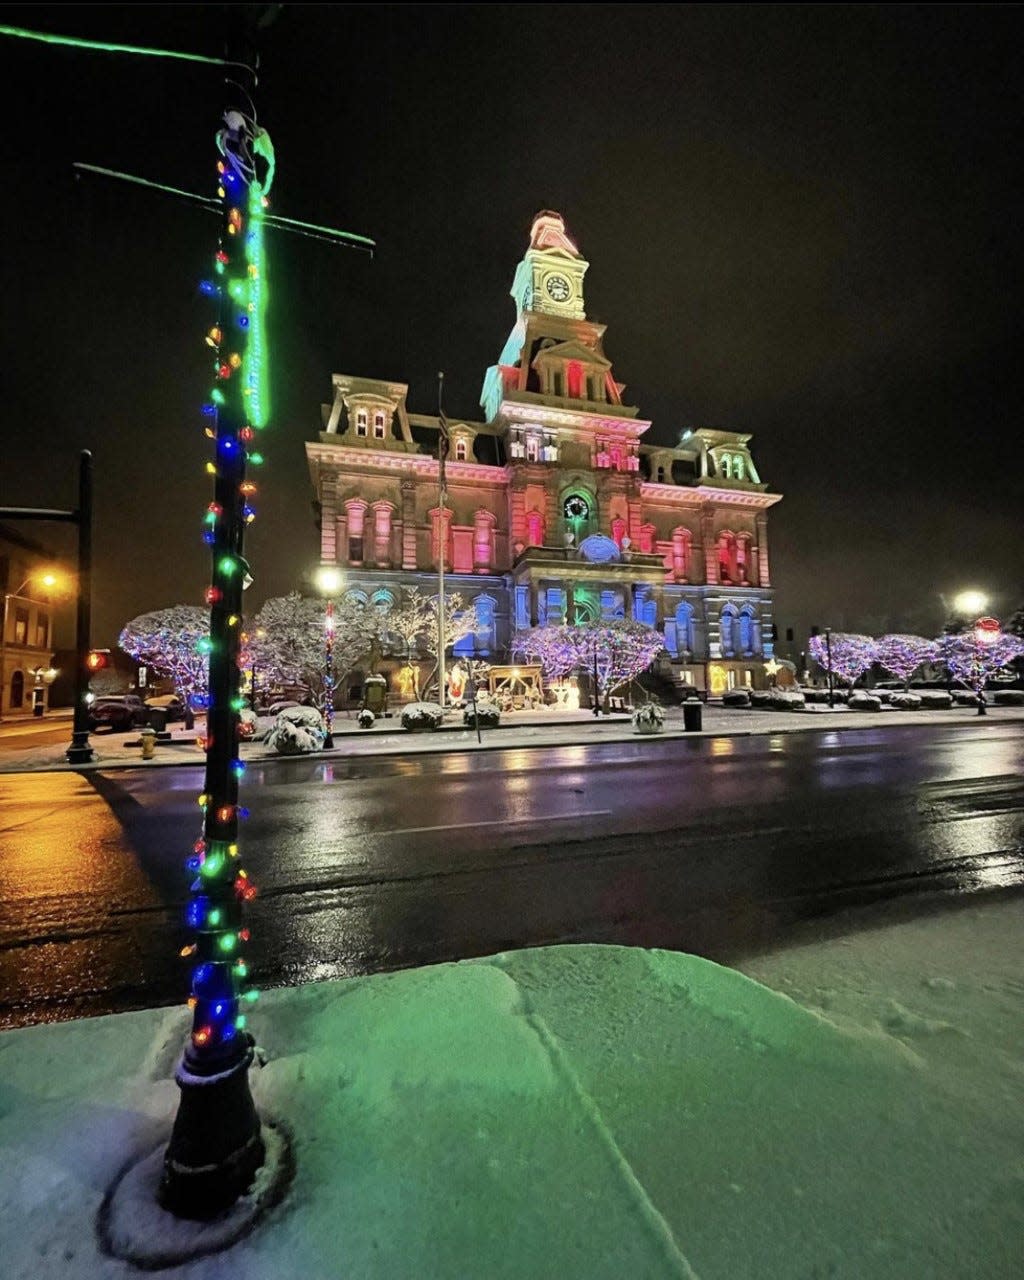 The Muskingum County Courthouse is brightly decorated for Christmas.